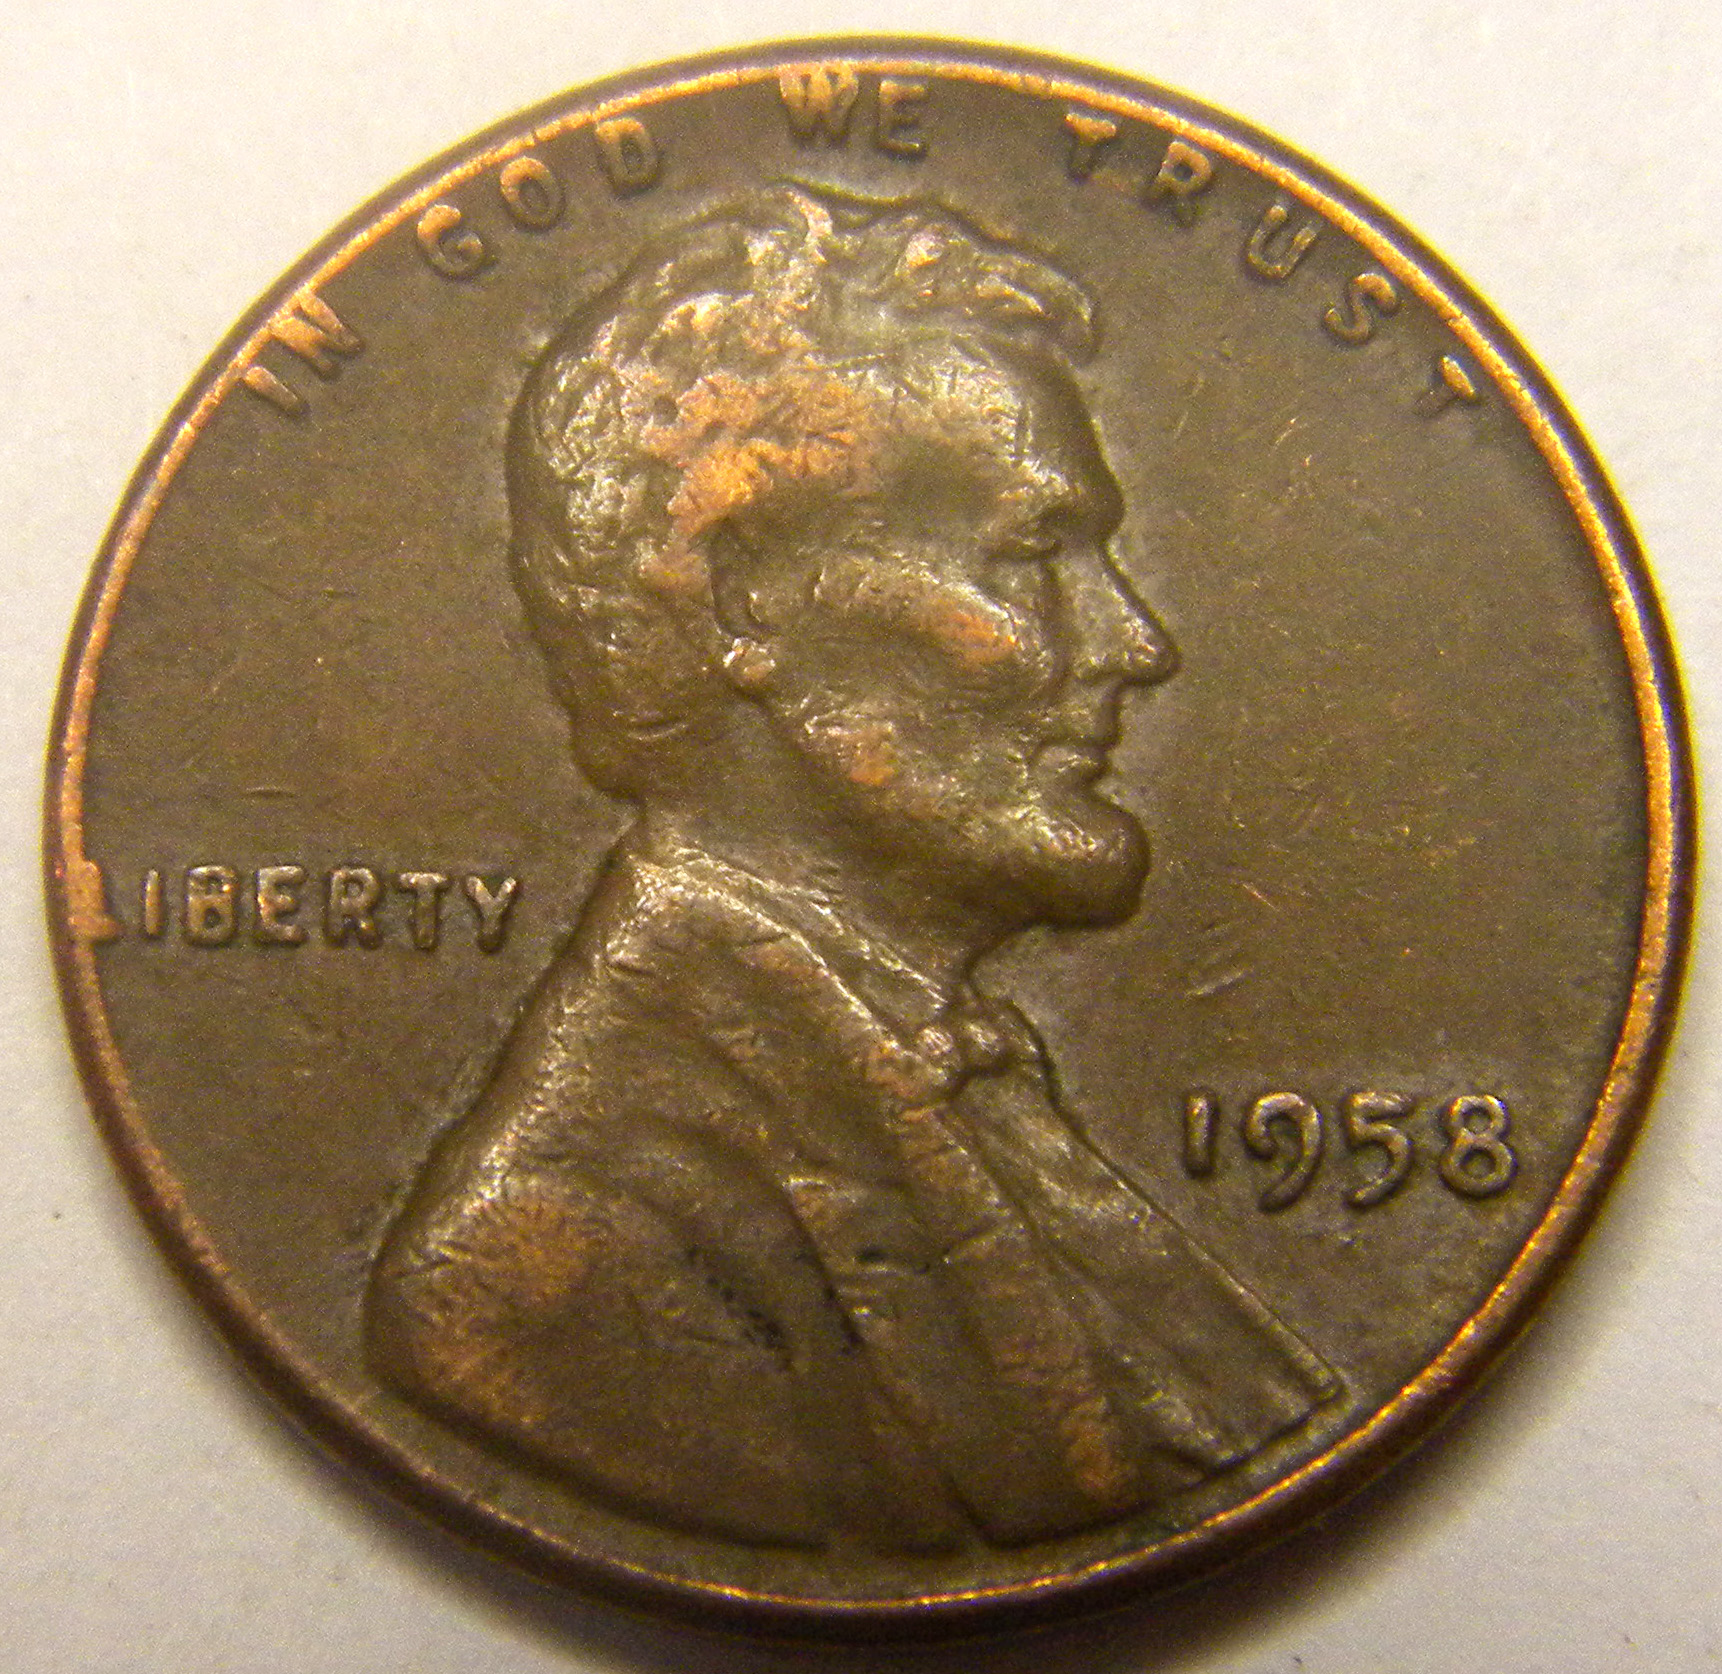 1958 Lincoln Wheat Penny - MAD plus Doubling Obverse? | Coin Talk